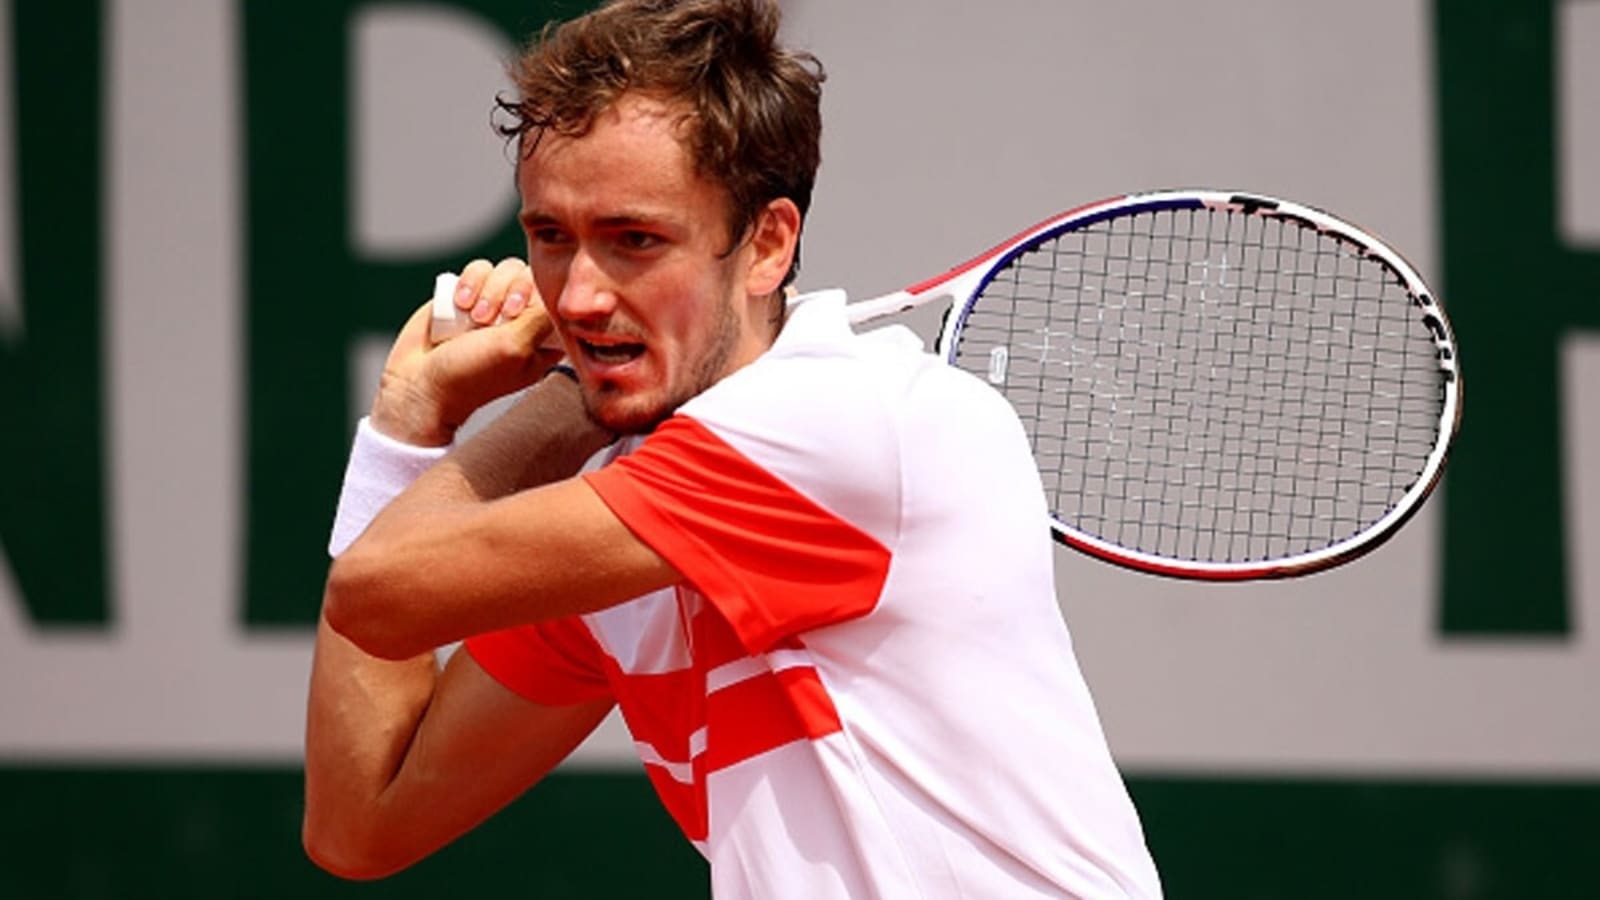 French Open Medvedev looking to finally clear first hurdle Tennis